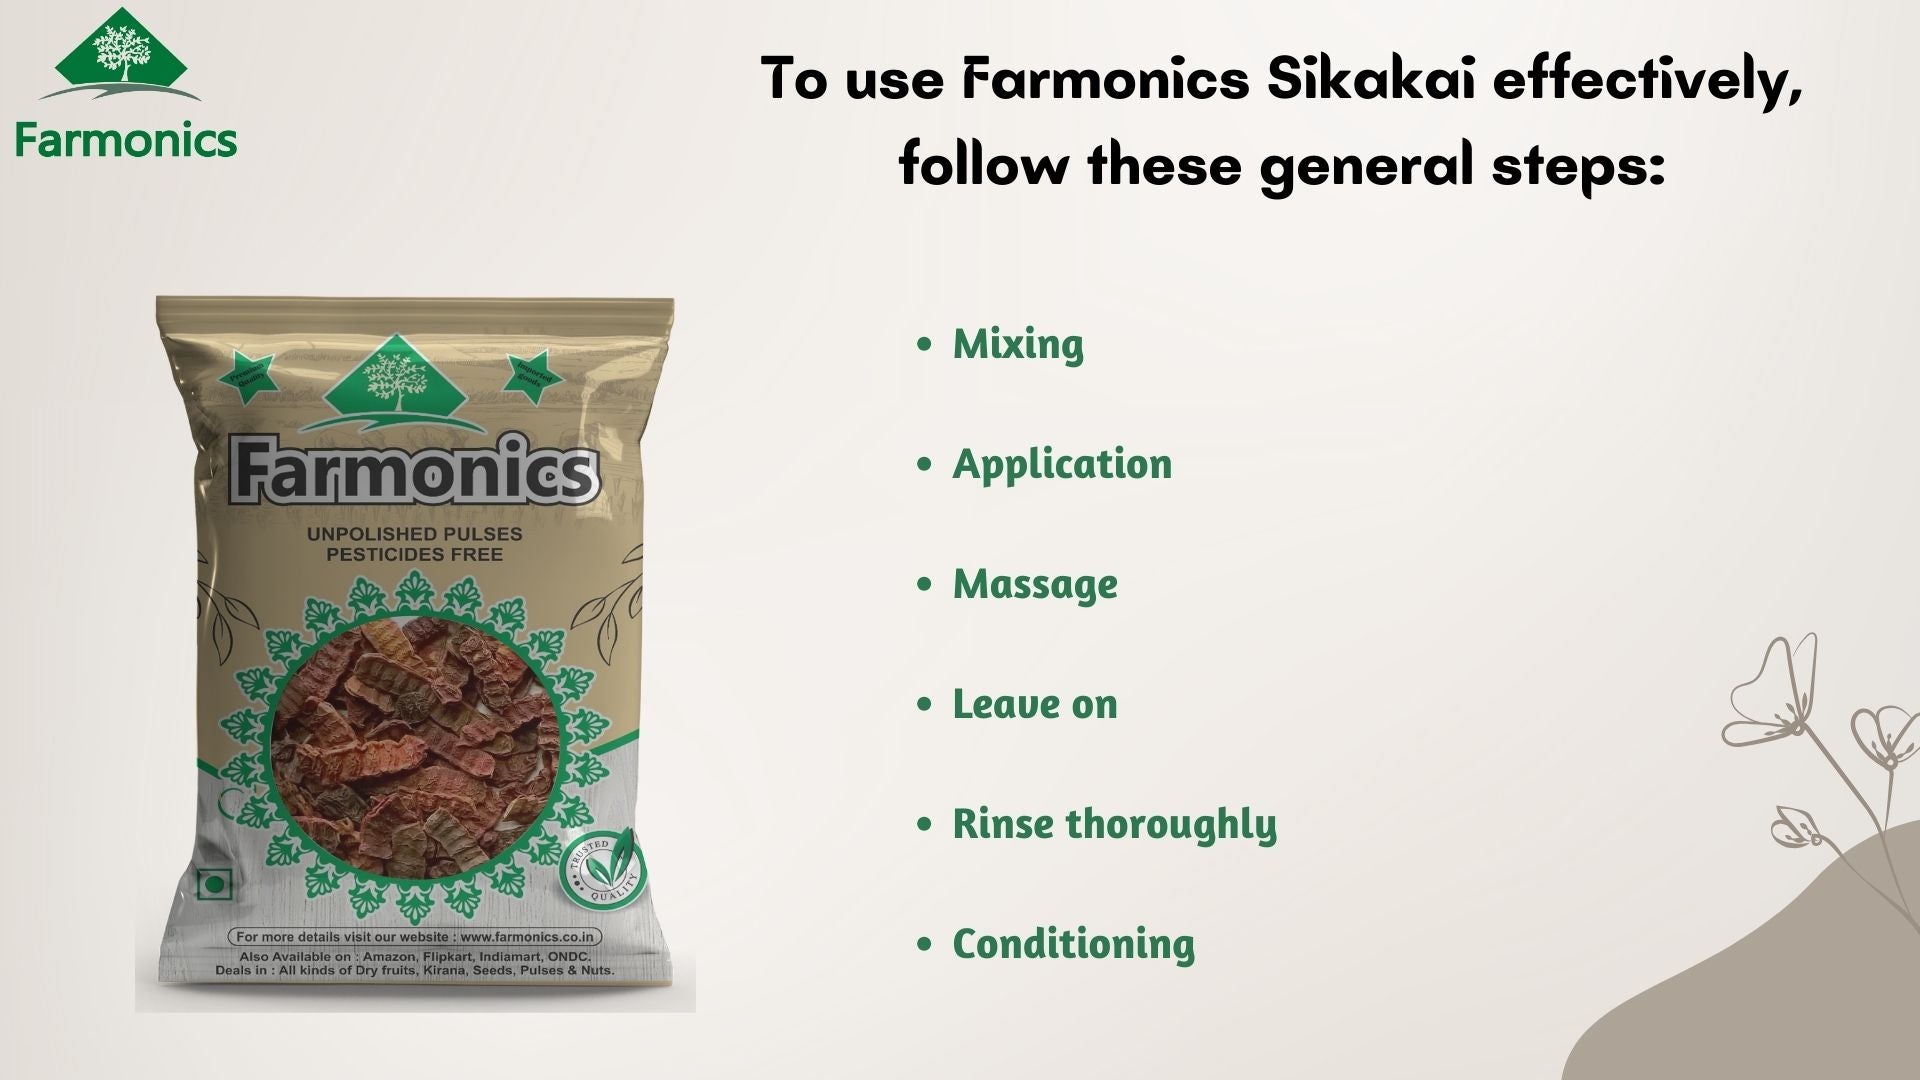 ways in which you can effectively use Farmonics shikakai 